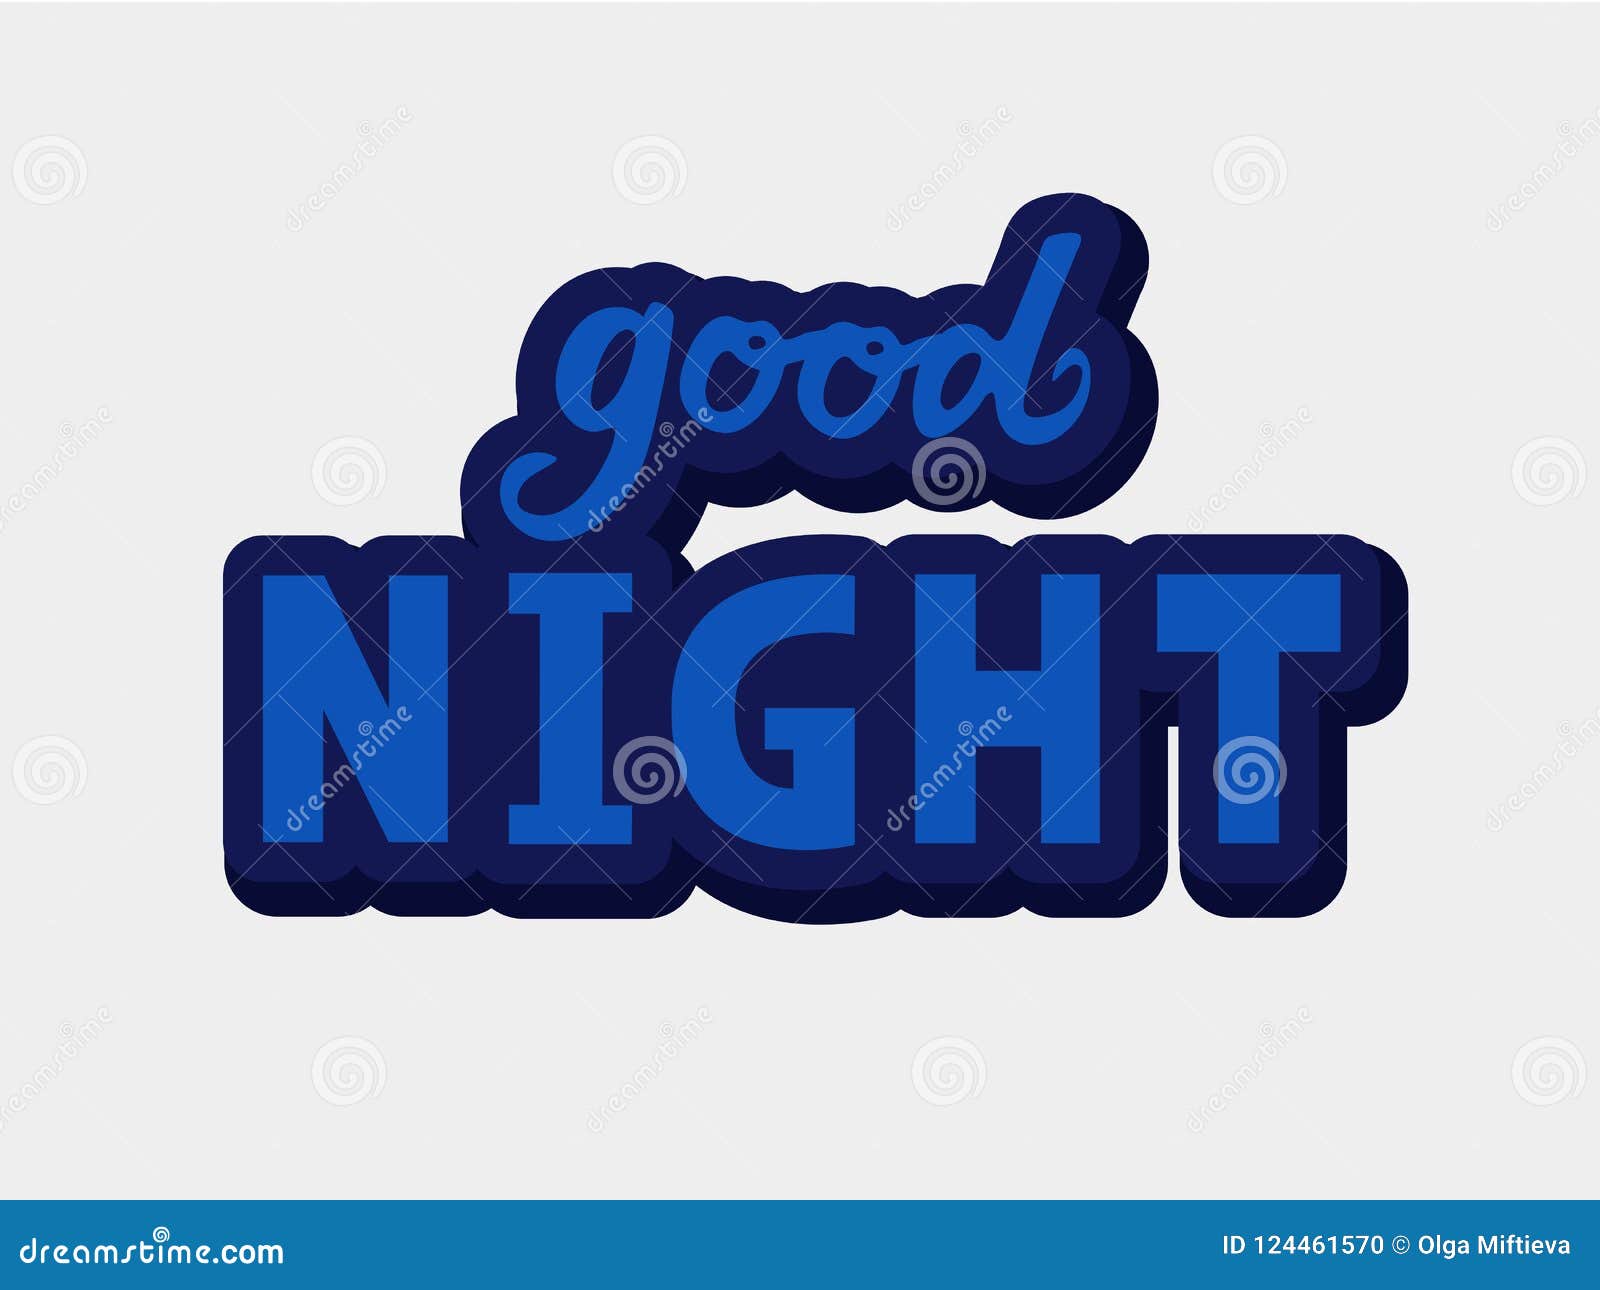 Vector Illustration of Good Night Text for Typography Poster, Logotype ...